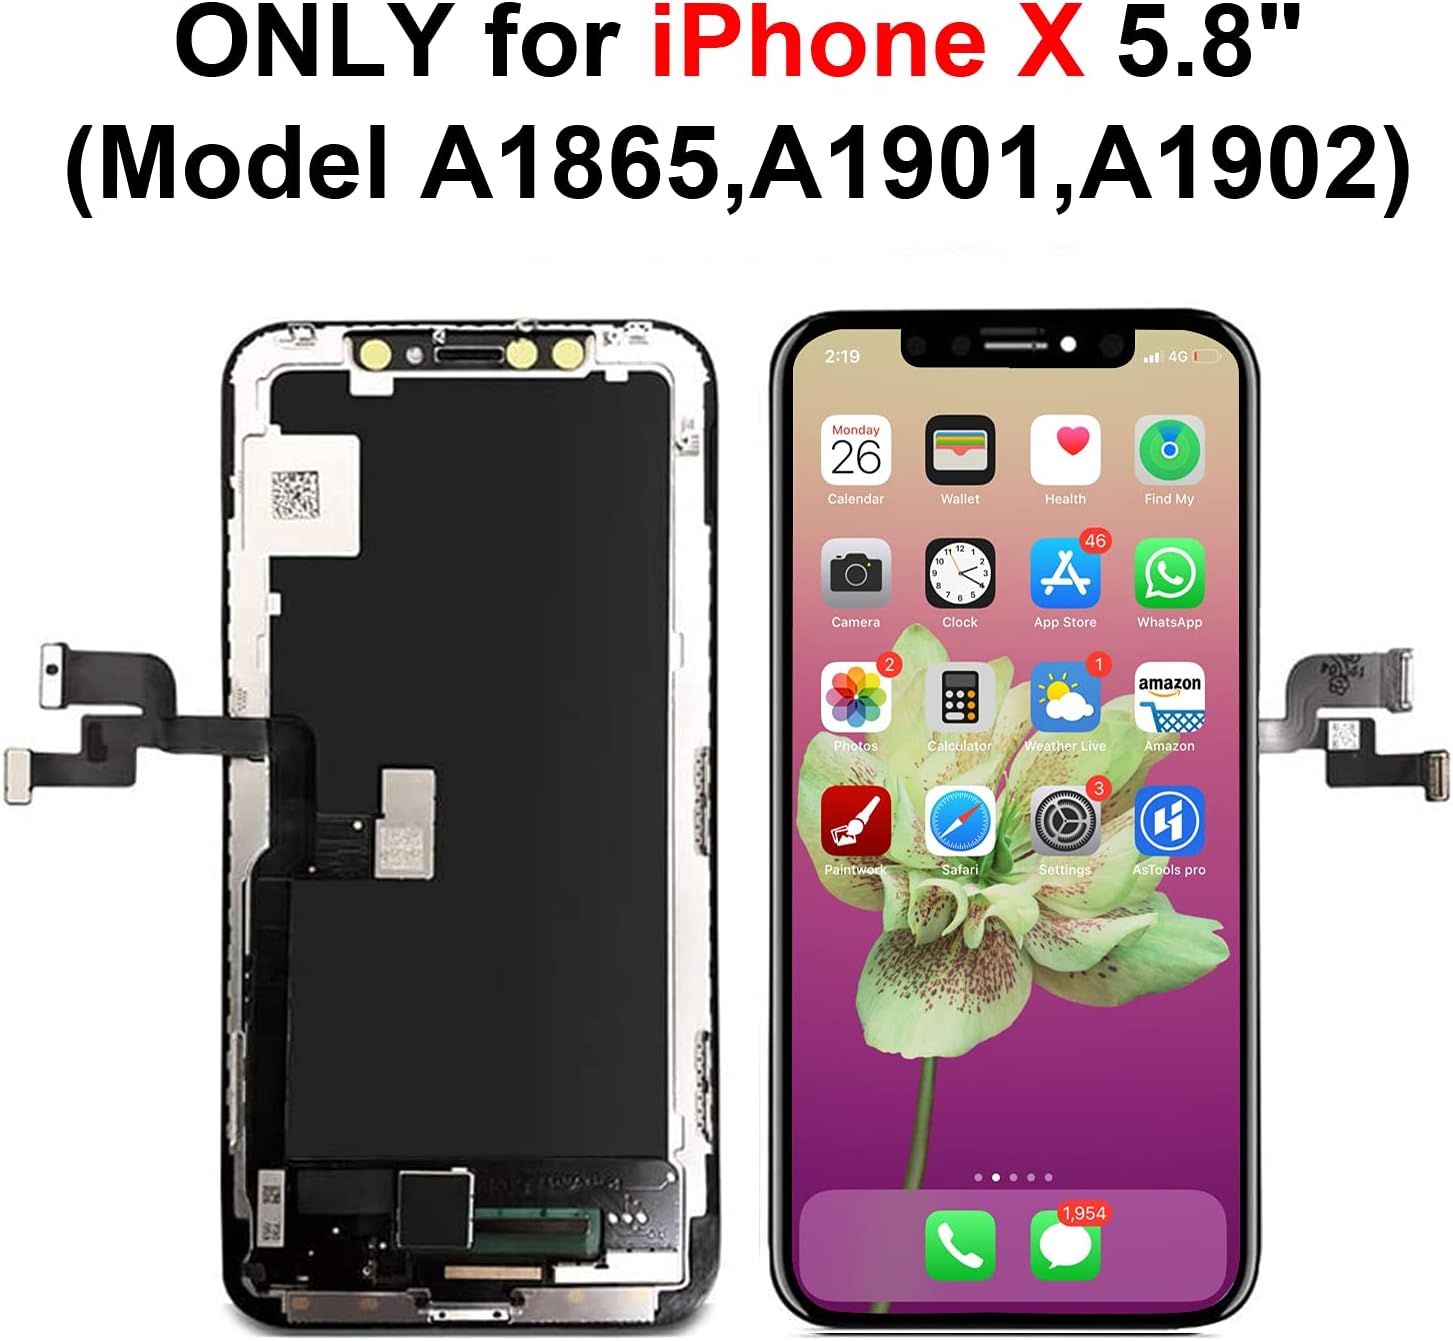 Brinonac for iPhone X OLED Screen Replacement Kit-0942